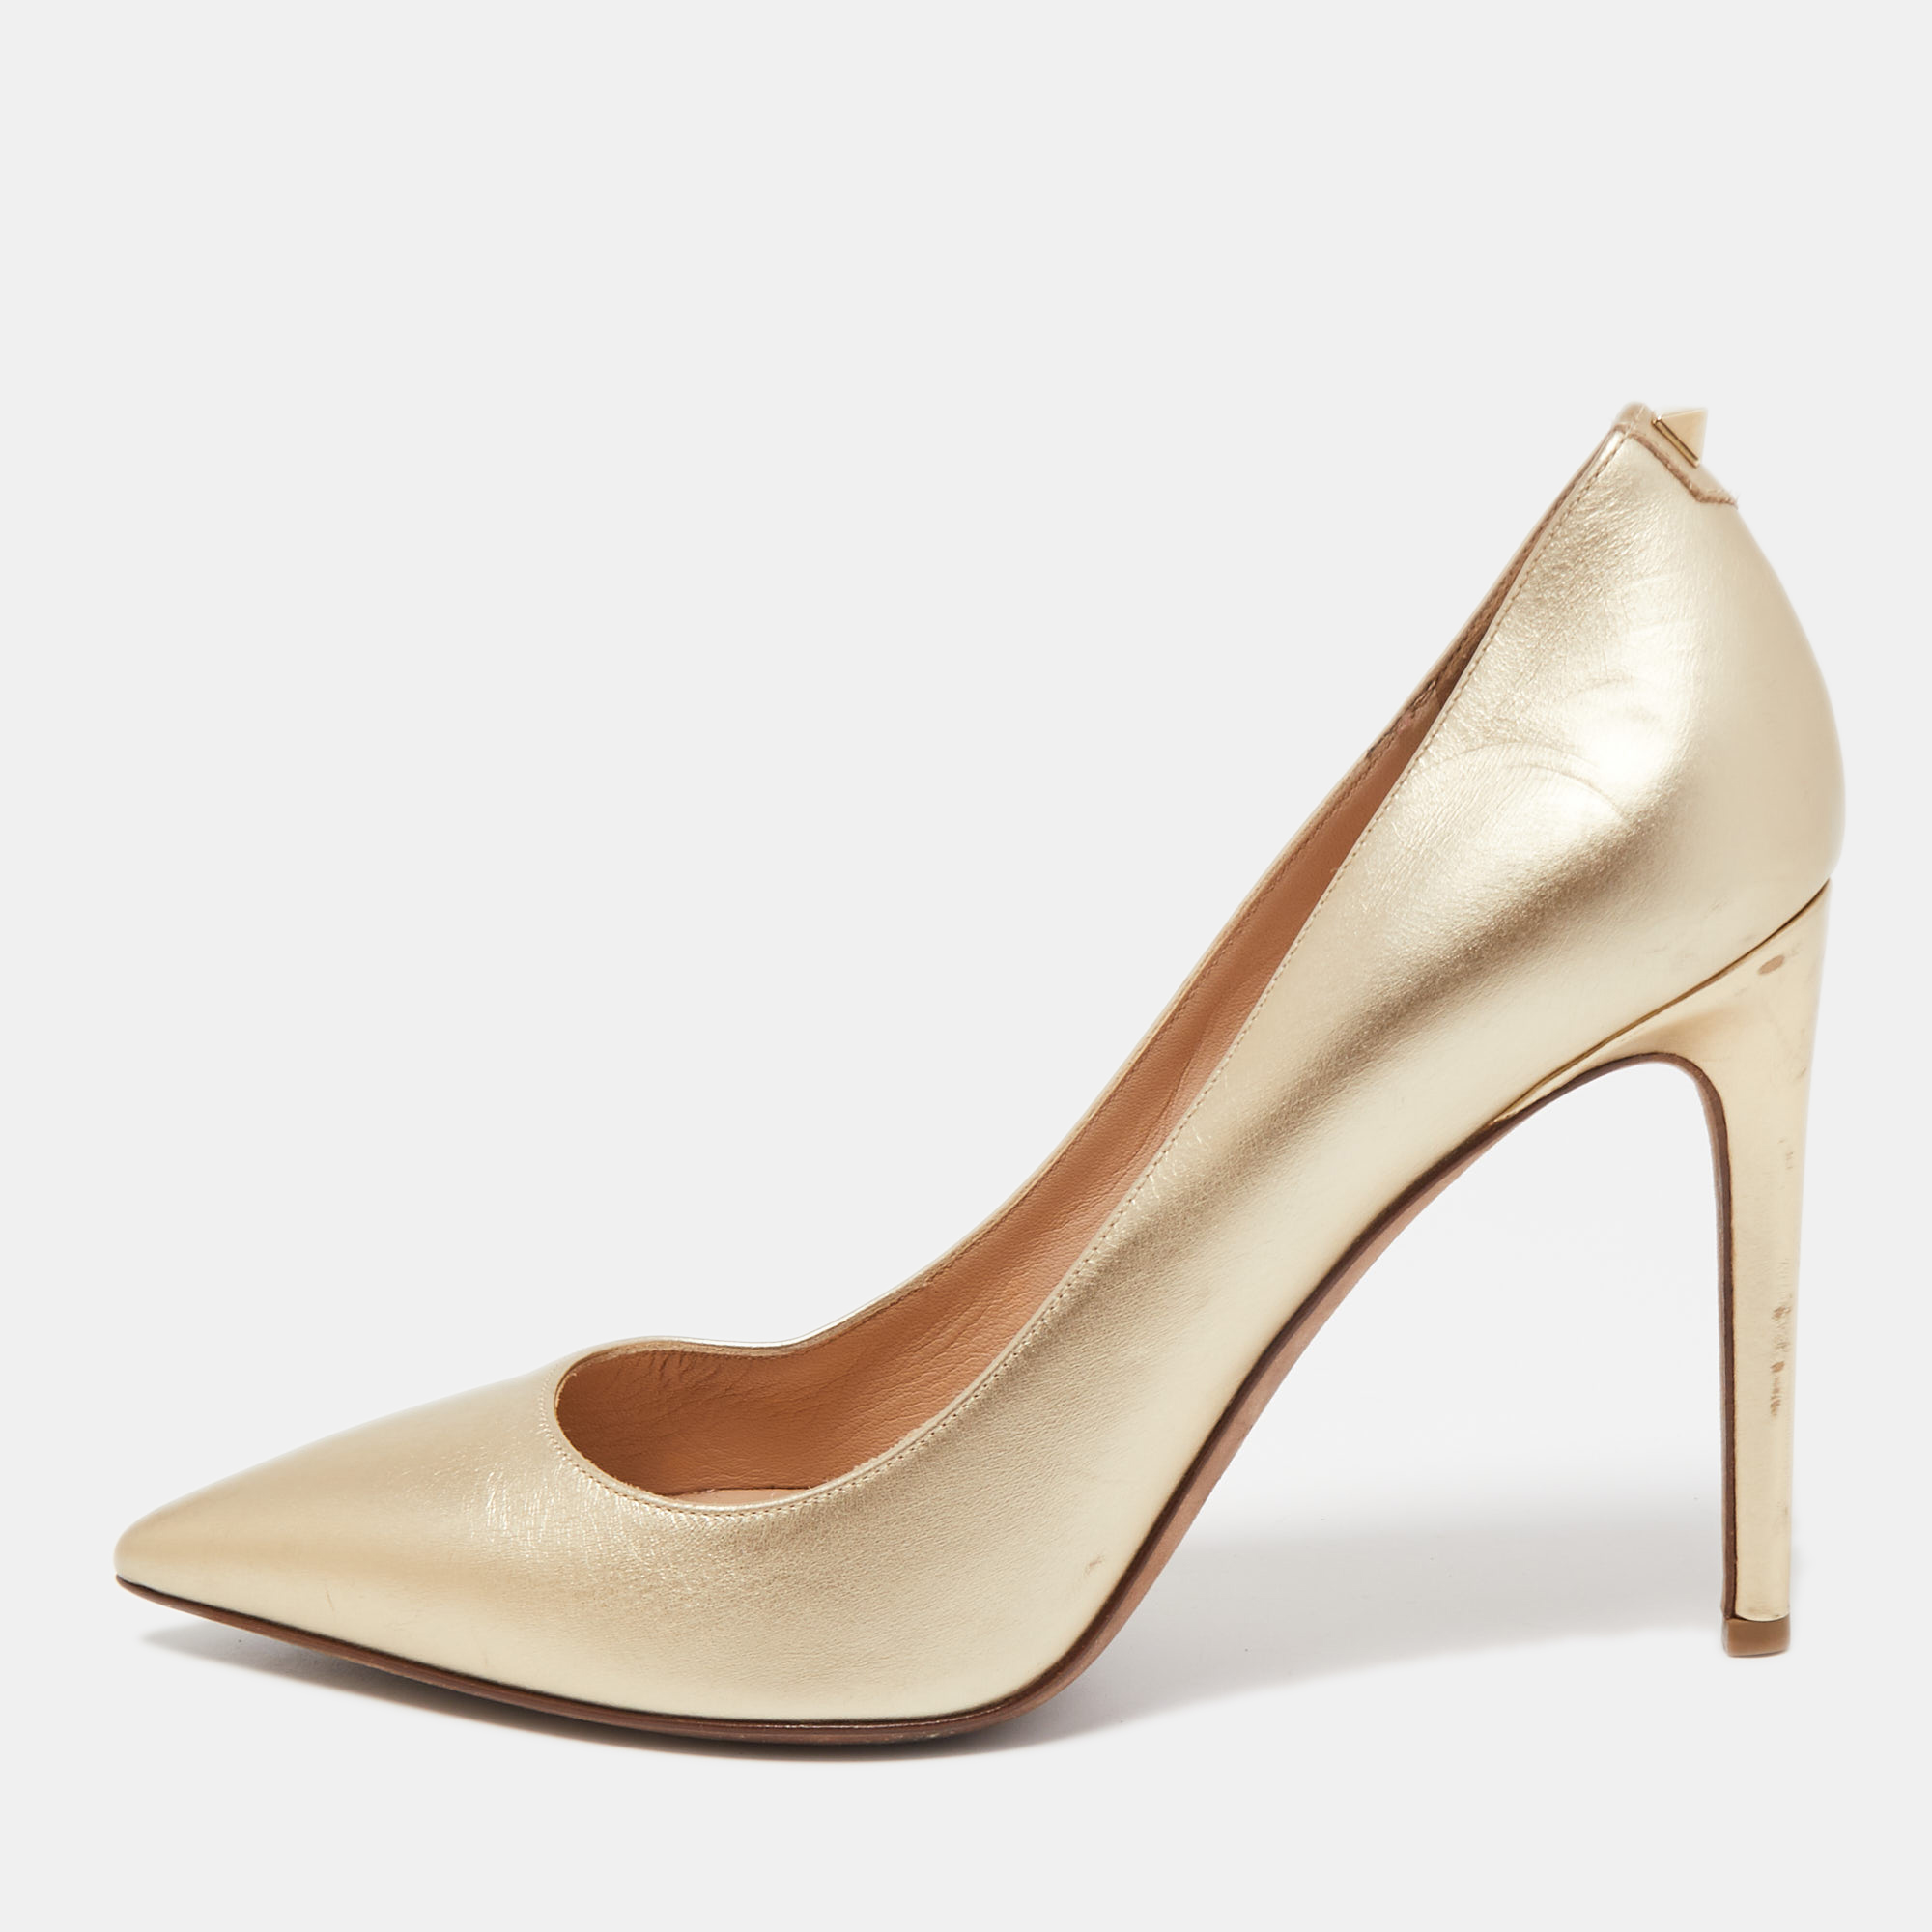 Pre-owned Valentino Garavani Gold Leather Pointed Toe Pumps Size 37